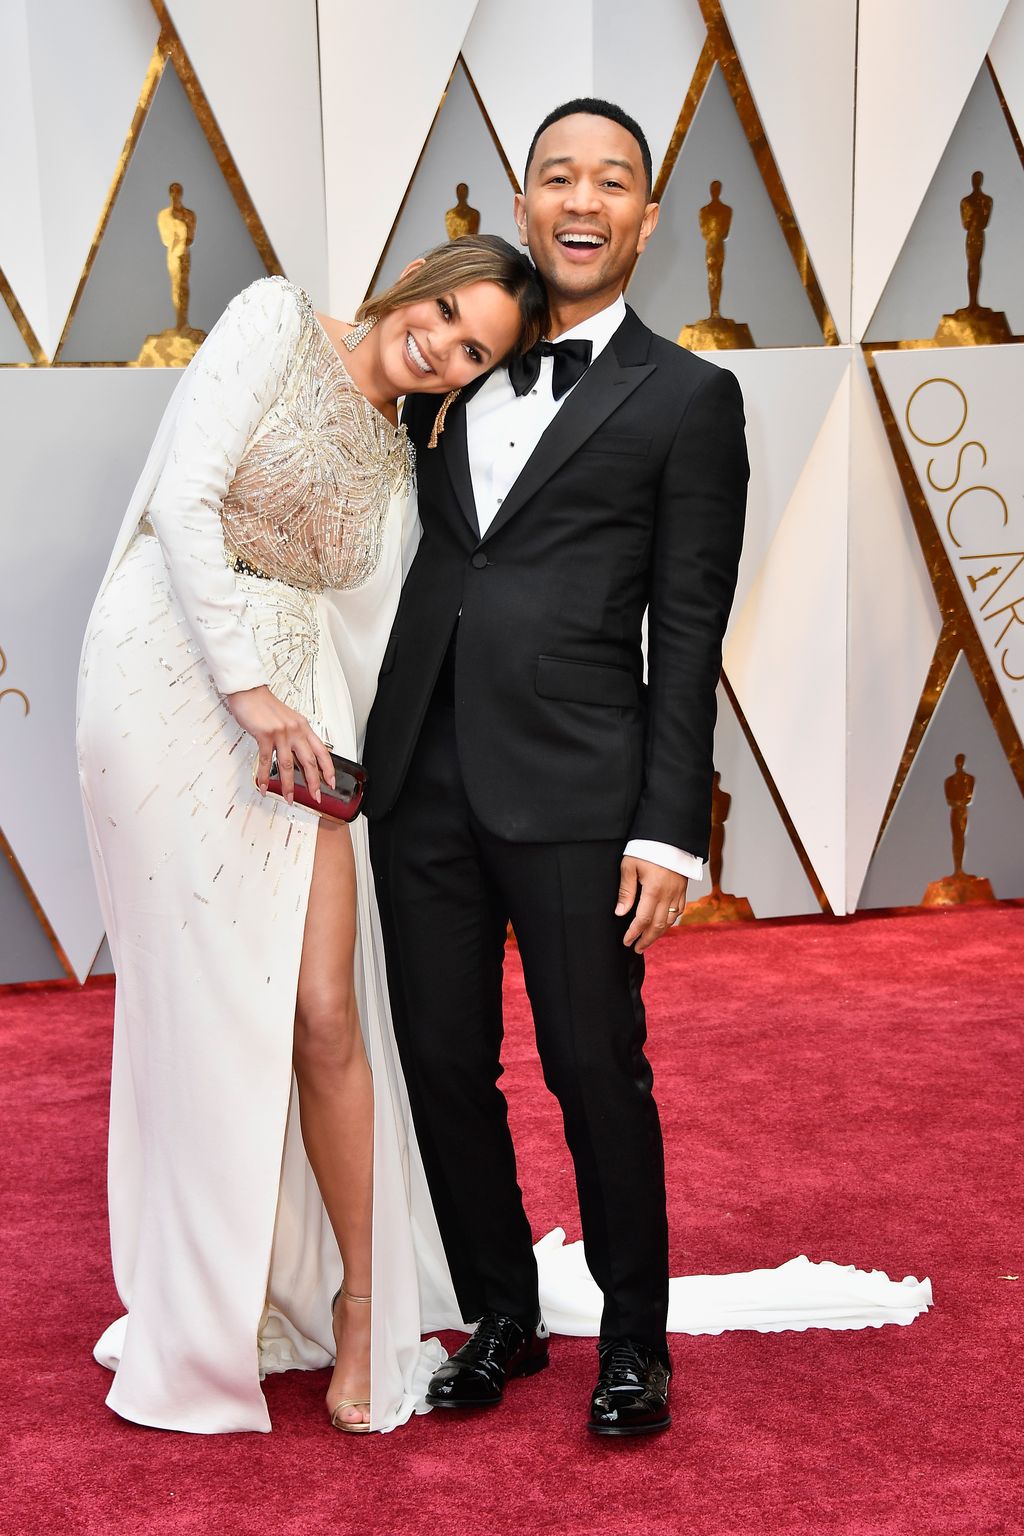 HOLLYWOOD, CA - FEBRUARY 26:  Model Chrissy Teigen (L) and singer John Legend attend the 89th Annual Academy Awards at Hollywood & Highland Center on February 26, 2017 in Hollywood, California.  (Photo by Frazer Harrison/Getty Images)